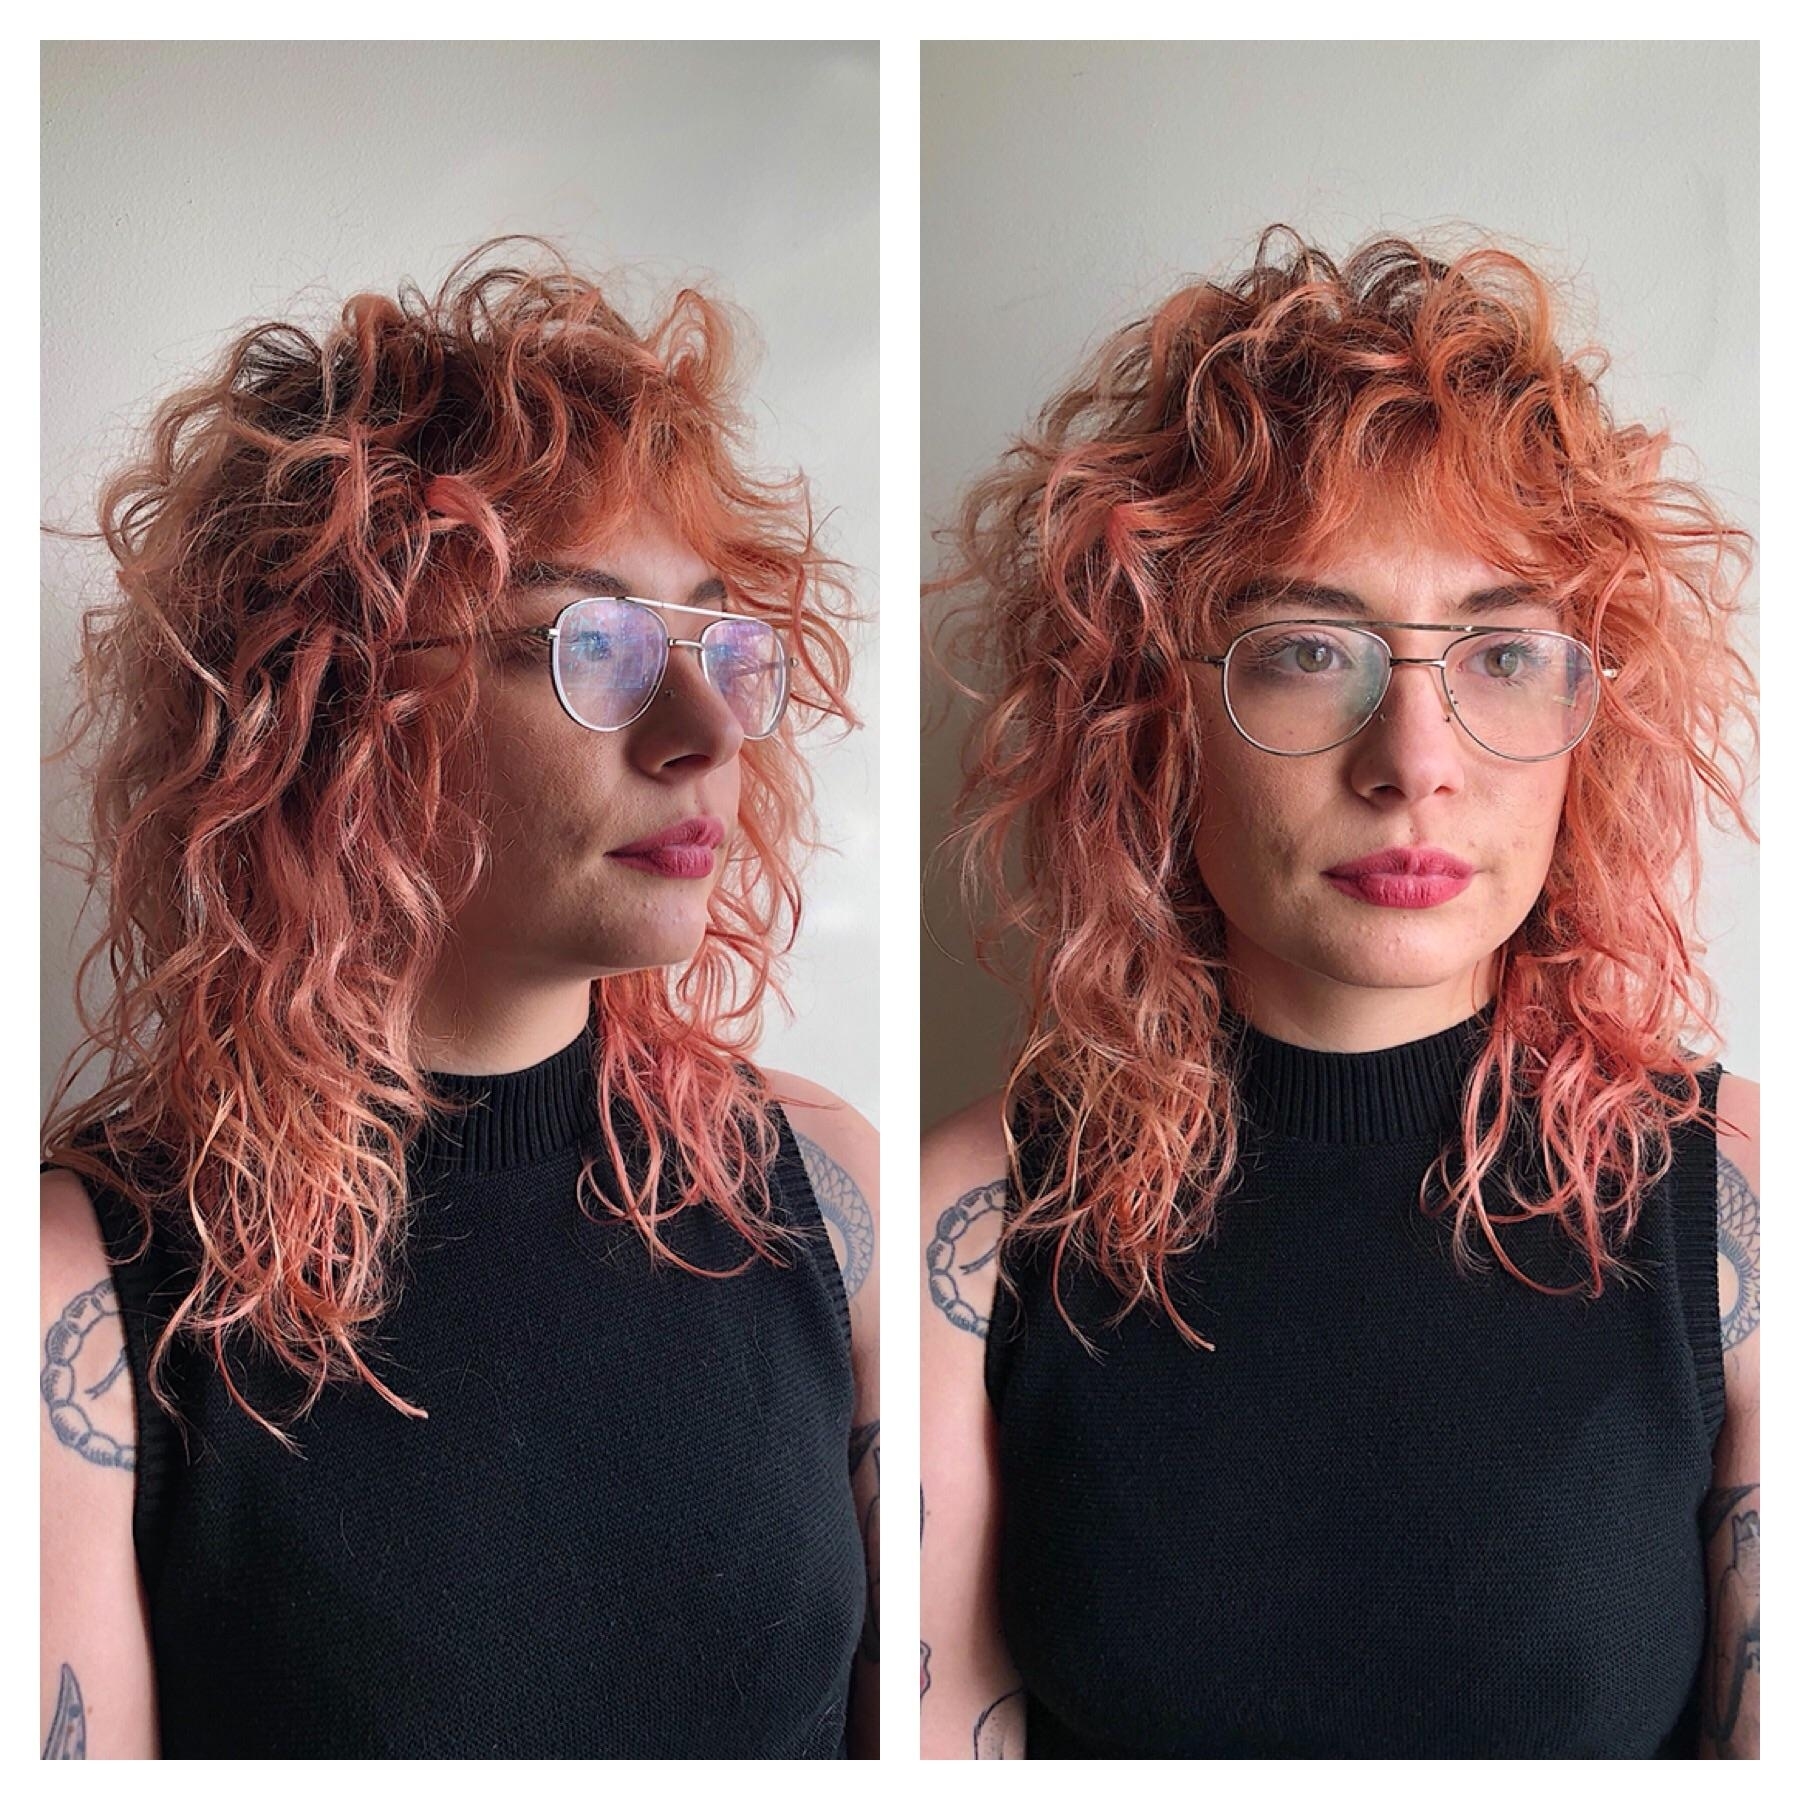 Psychedelic Dream Shag - I Think I Love Cutting Curly Hair Most in Haircut For Curly Hair Reddit